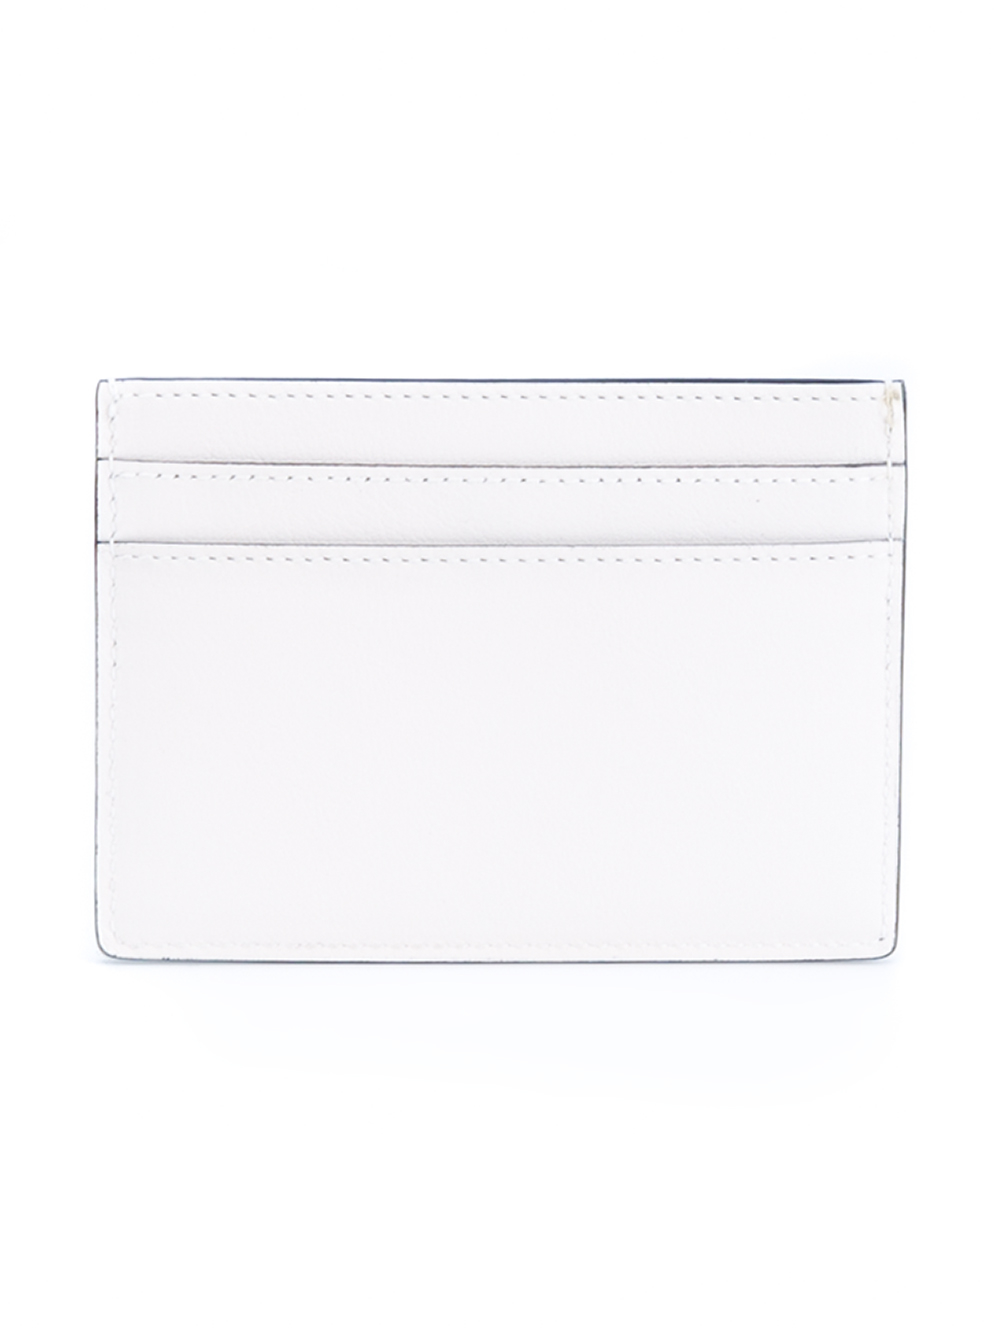 Saint Laurent Leather Card Holder in White | Lyst